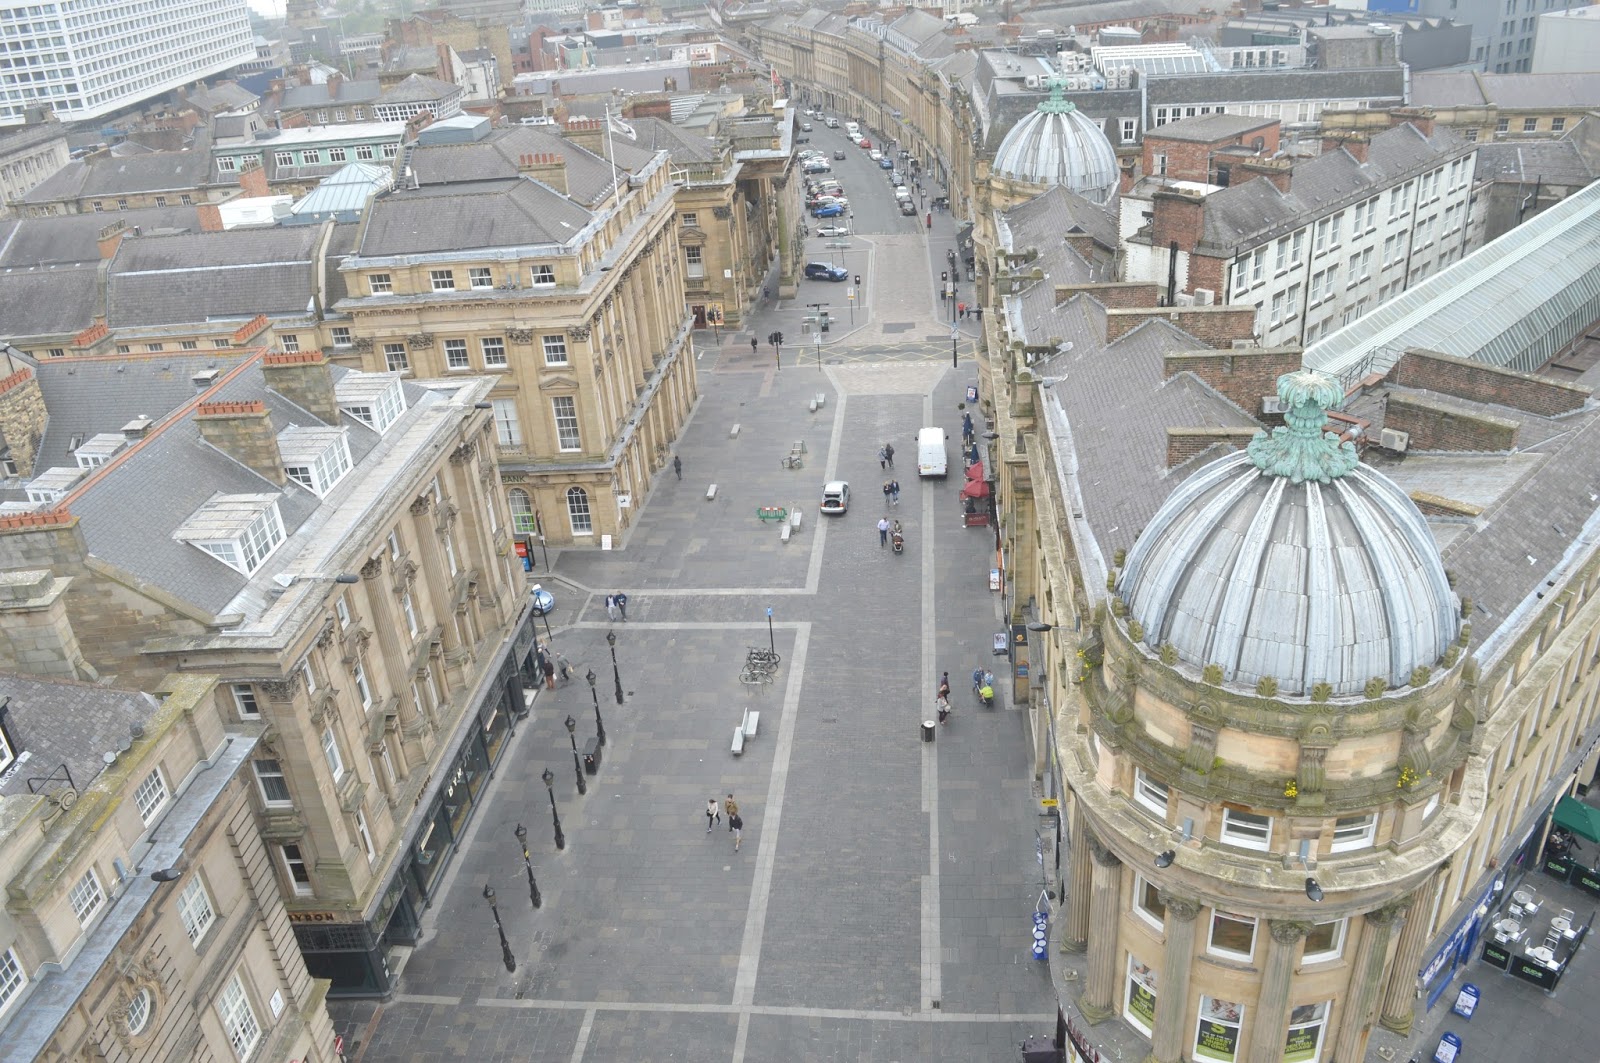 Dinner with the Earl - Climb Grey's Monument, Newcastle with The Botanist